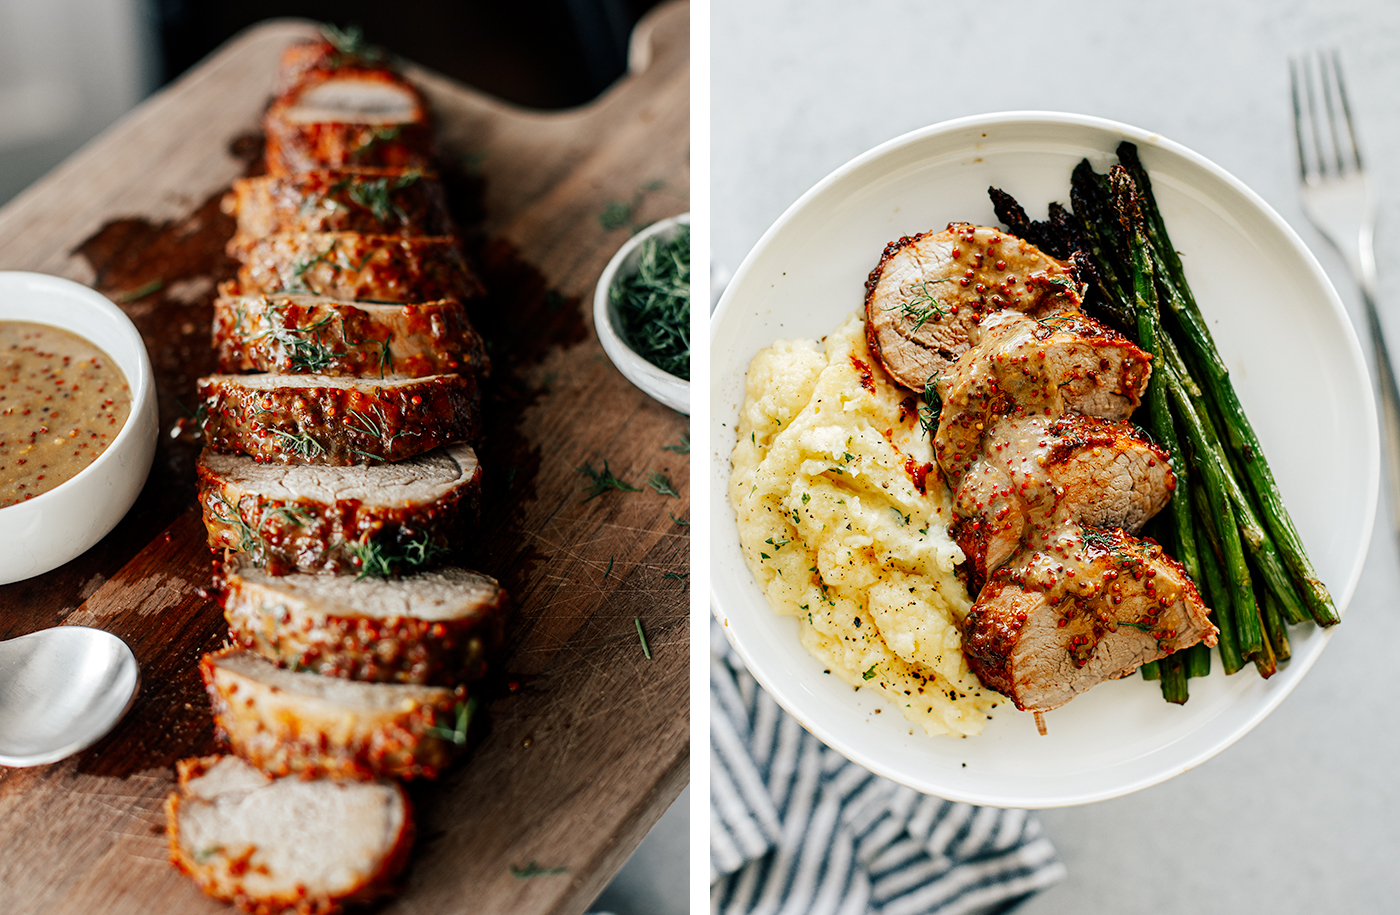 Left photo: Pork tenderloin sliced on a cutting board; Right photo: Plate of sliced pork medallions on mashed potatoes and asparagus spears.